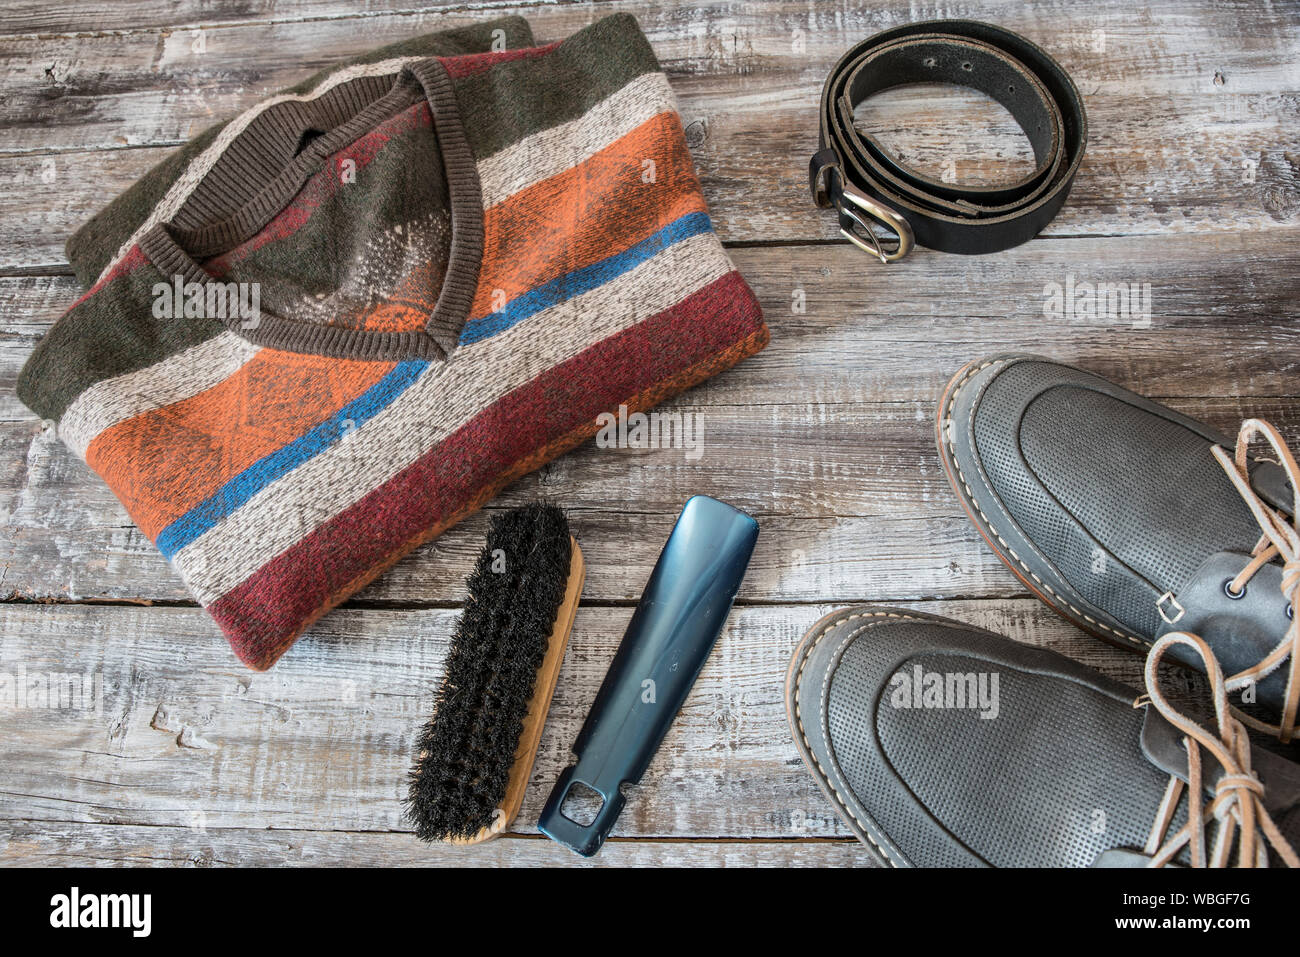 High Angle View Of Striped T-shirt With Shoe And Brush On Table Stock Photo